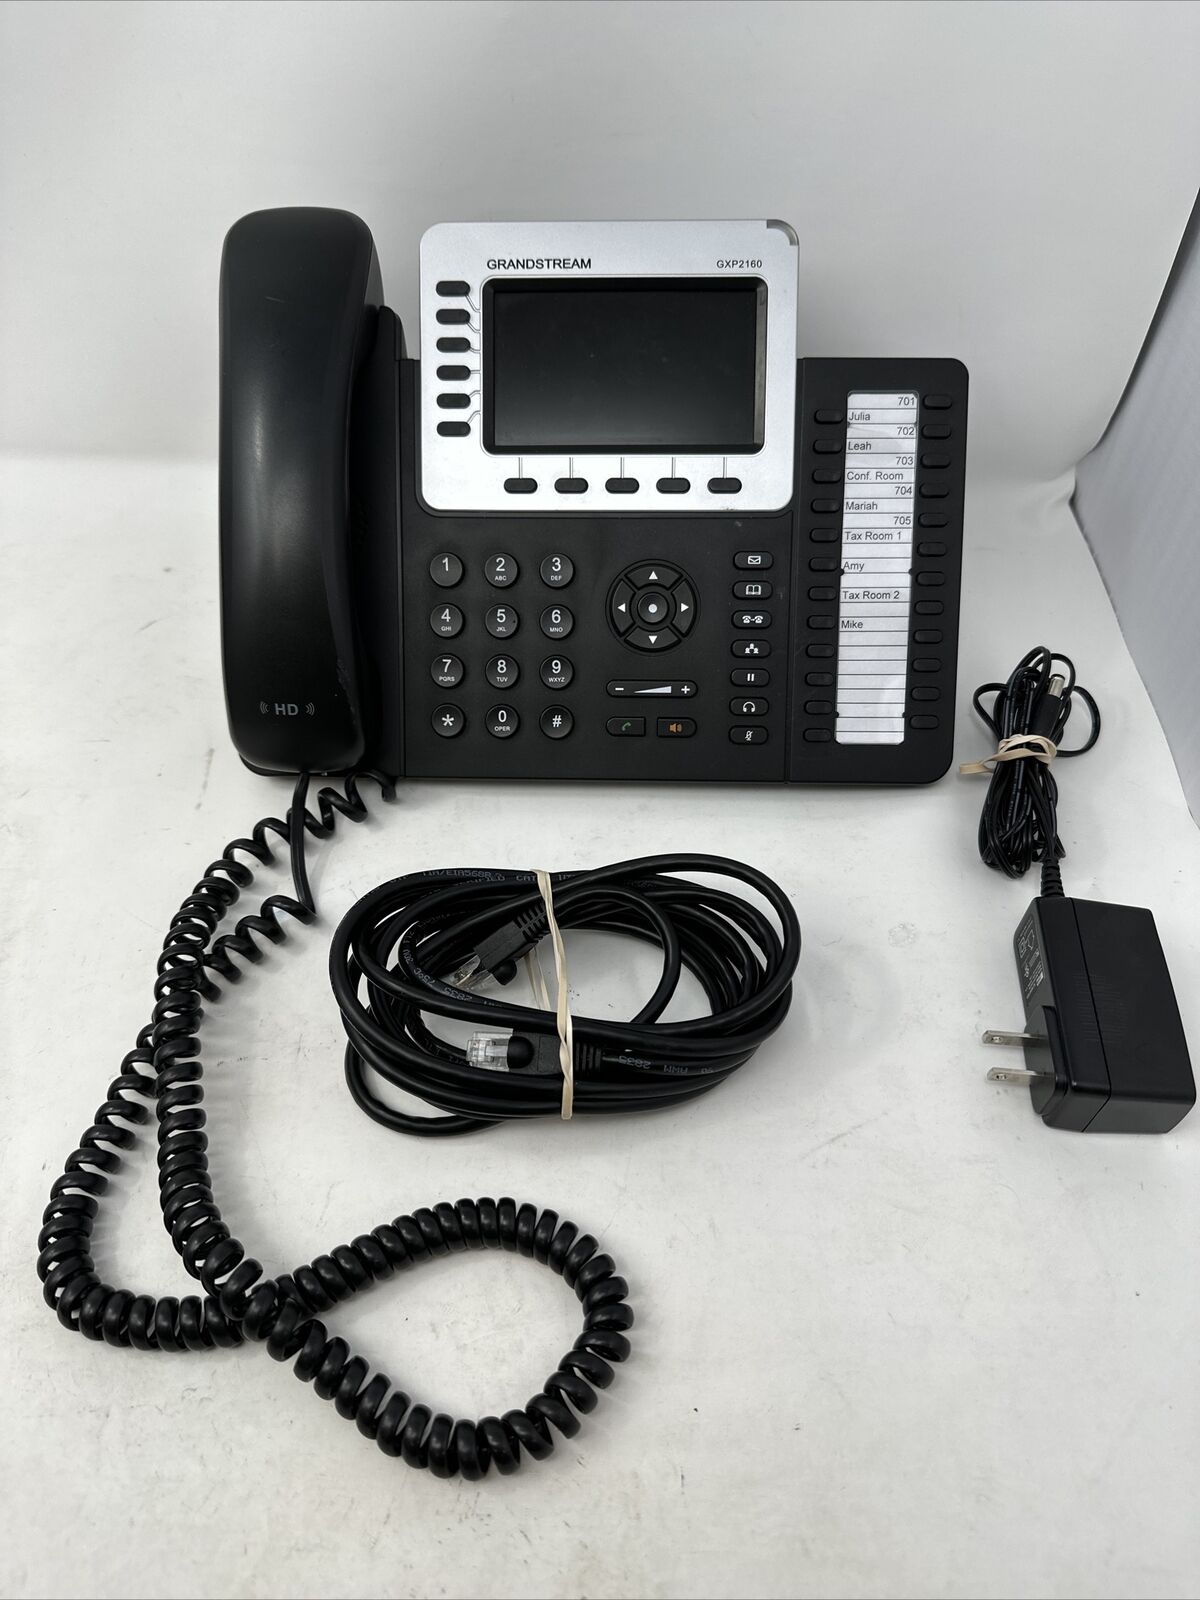 Grandstream GXP2160 Enterprise HD 6 Line VoIP Phone Black with Desk Stand Tested